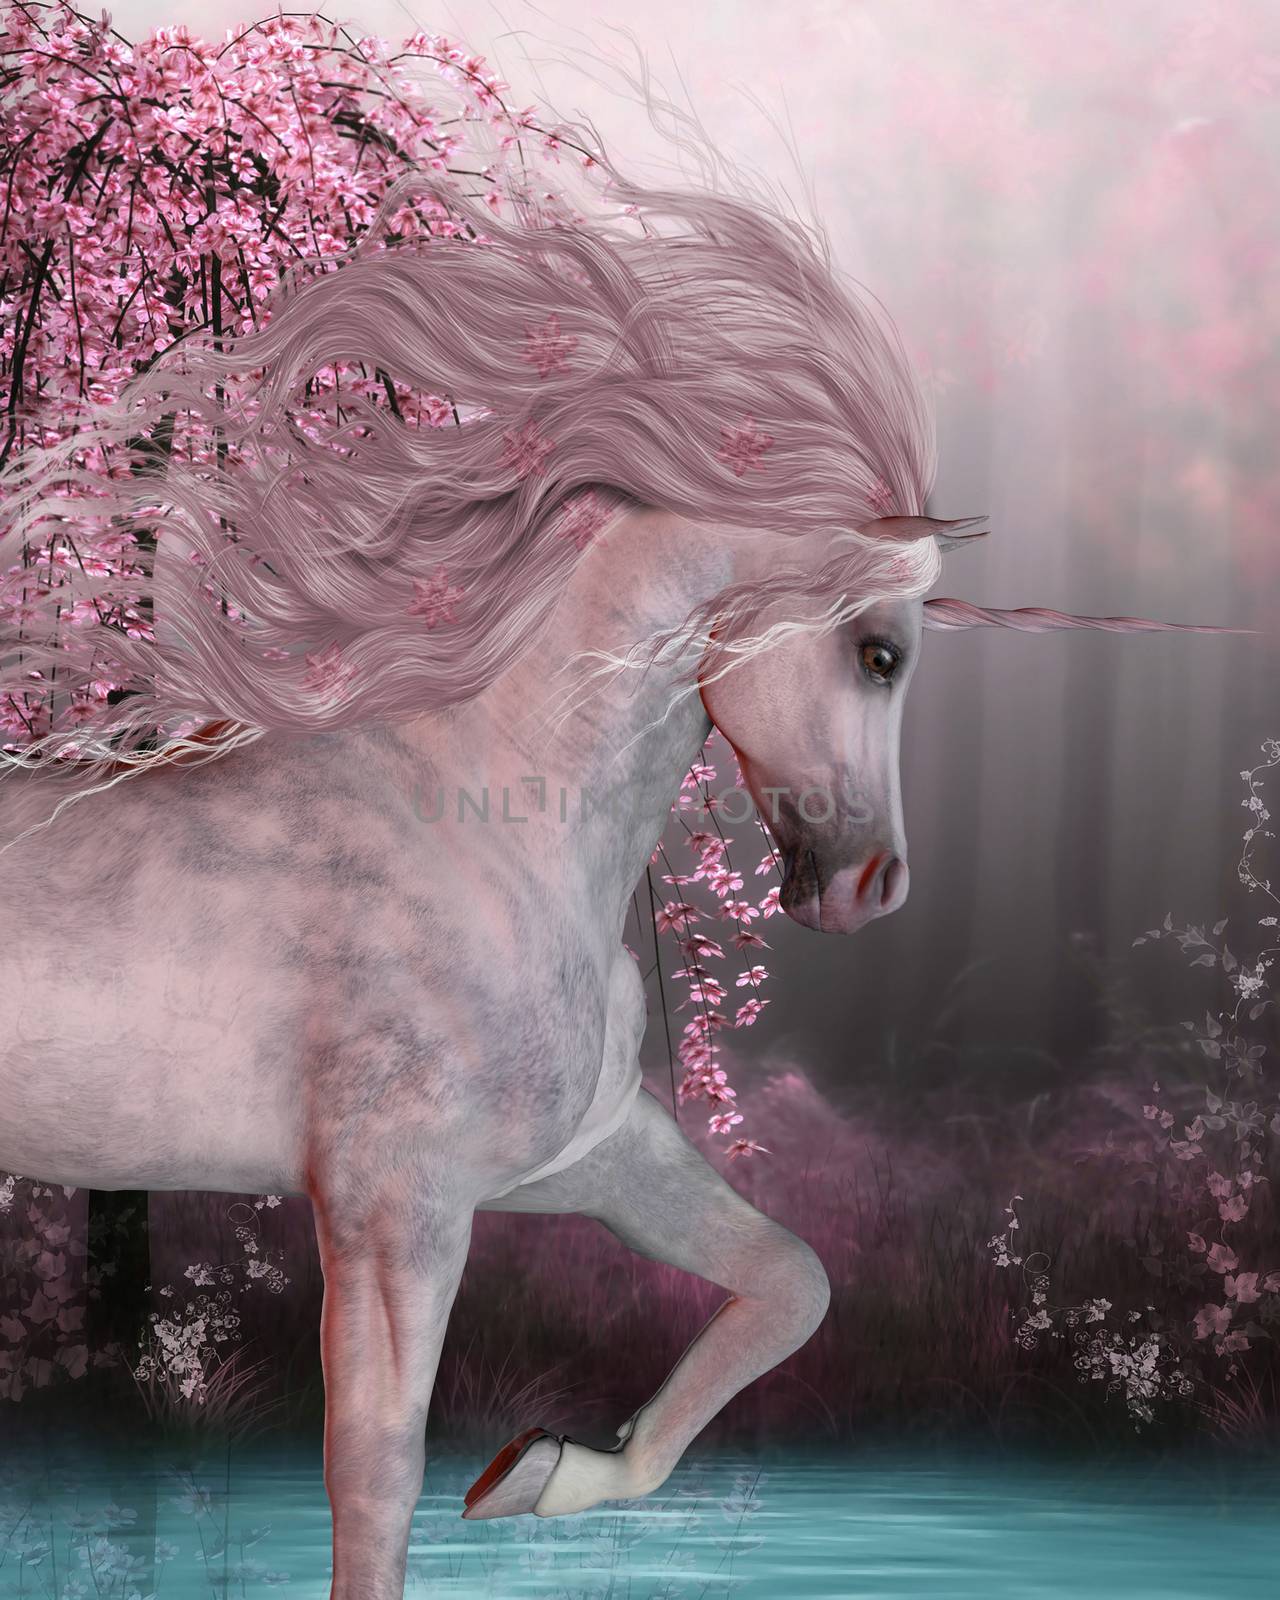 The Unicorn horse is a mythical creature with a horn on it's forehead and cloven hoofs and lives in the magical forest.